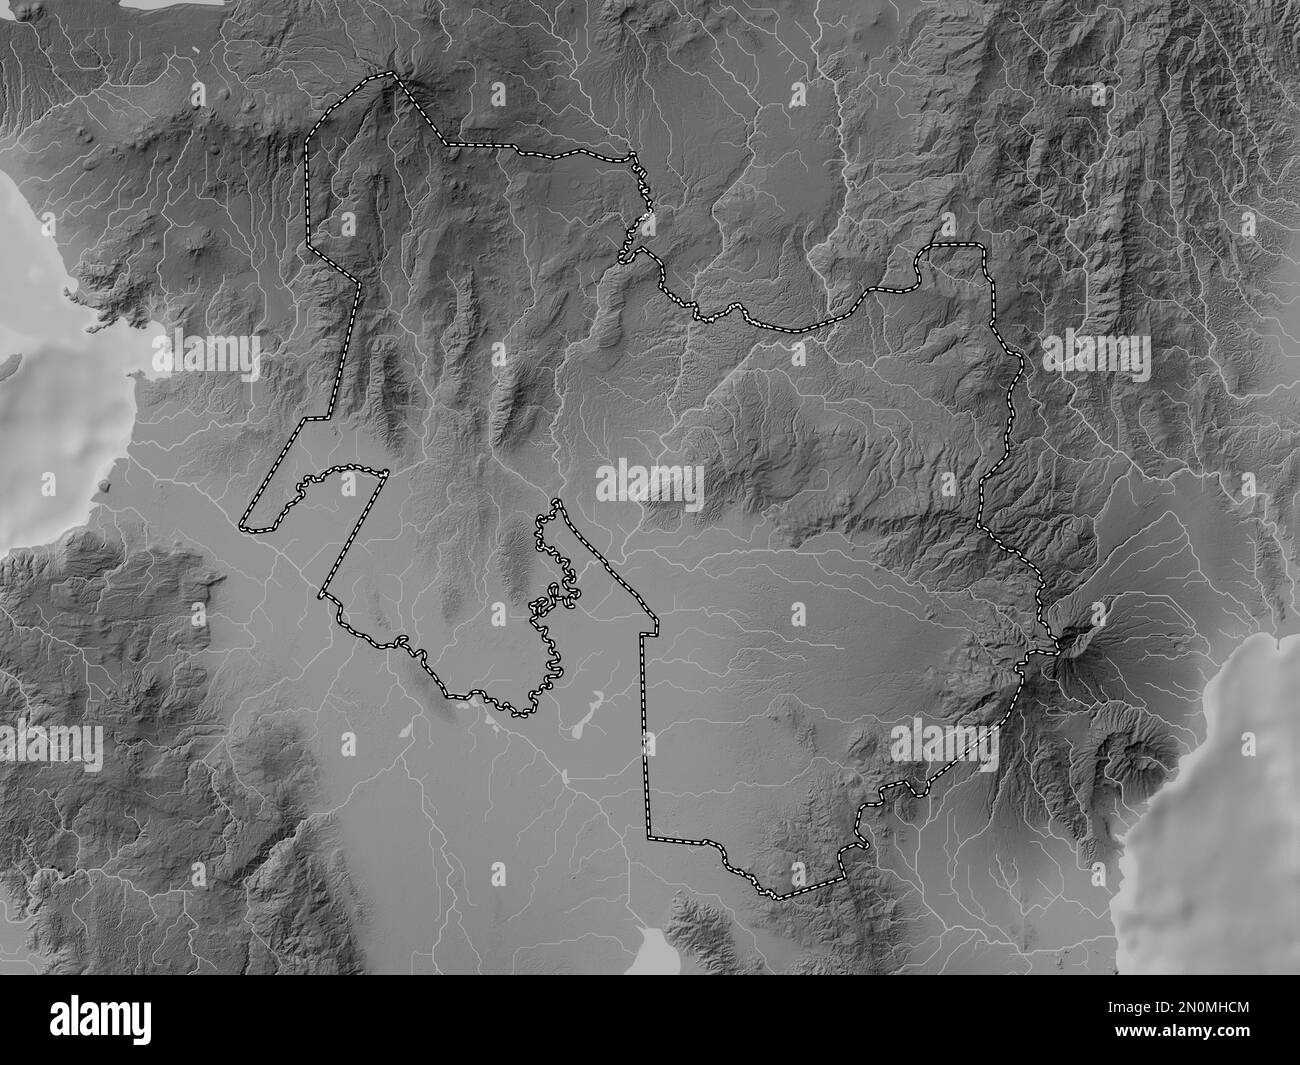 North Cotabato, province of Philippines. Grayscale elevation map with lakes and rivers Stock Photo